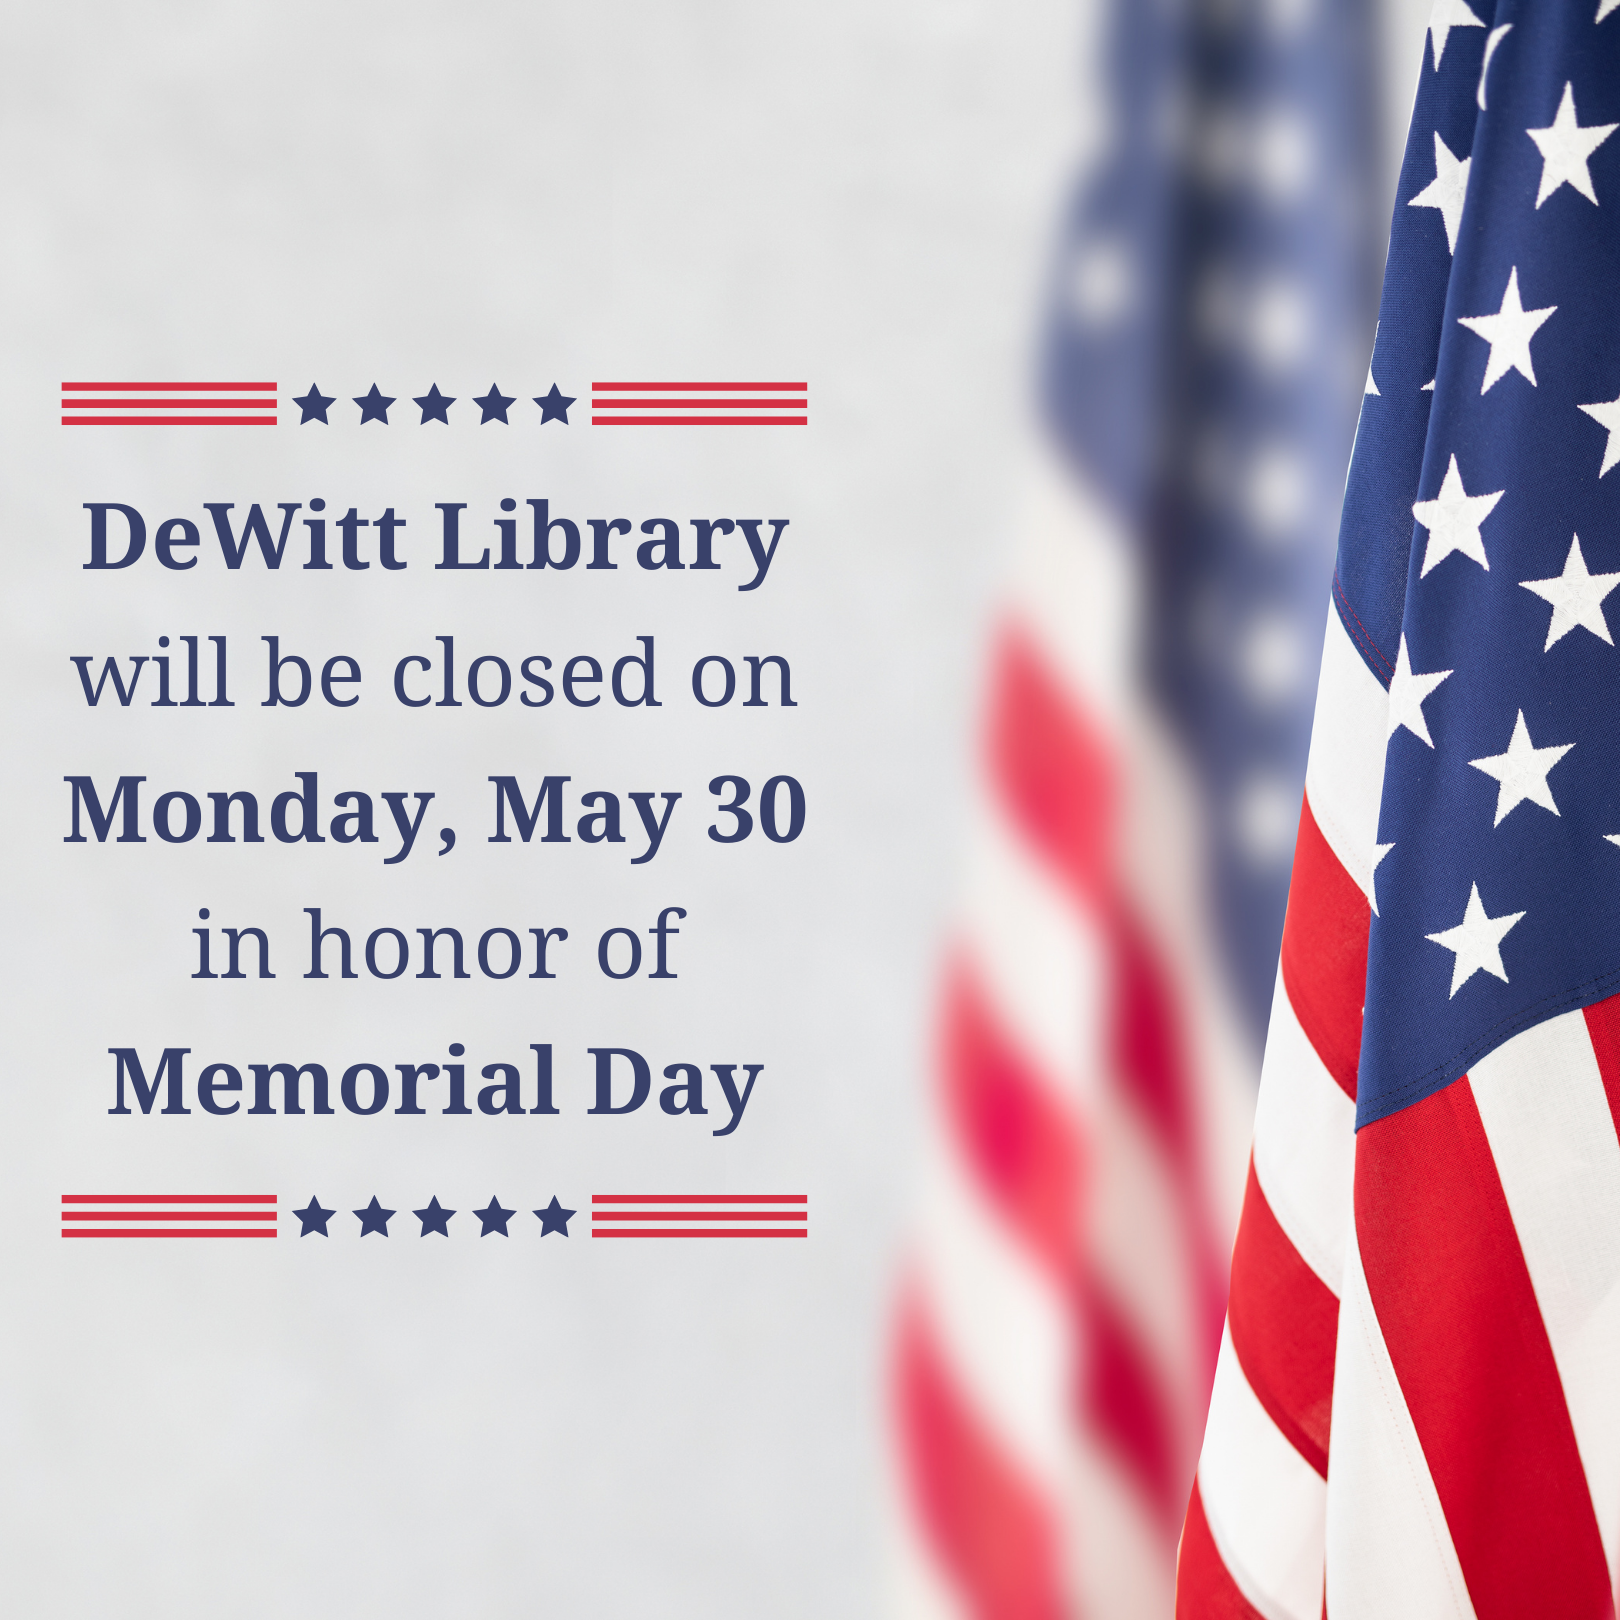 DeWitt Library will be closed on Monday, May 30 in honor of Memorial Day.